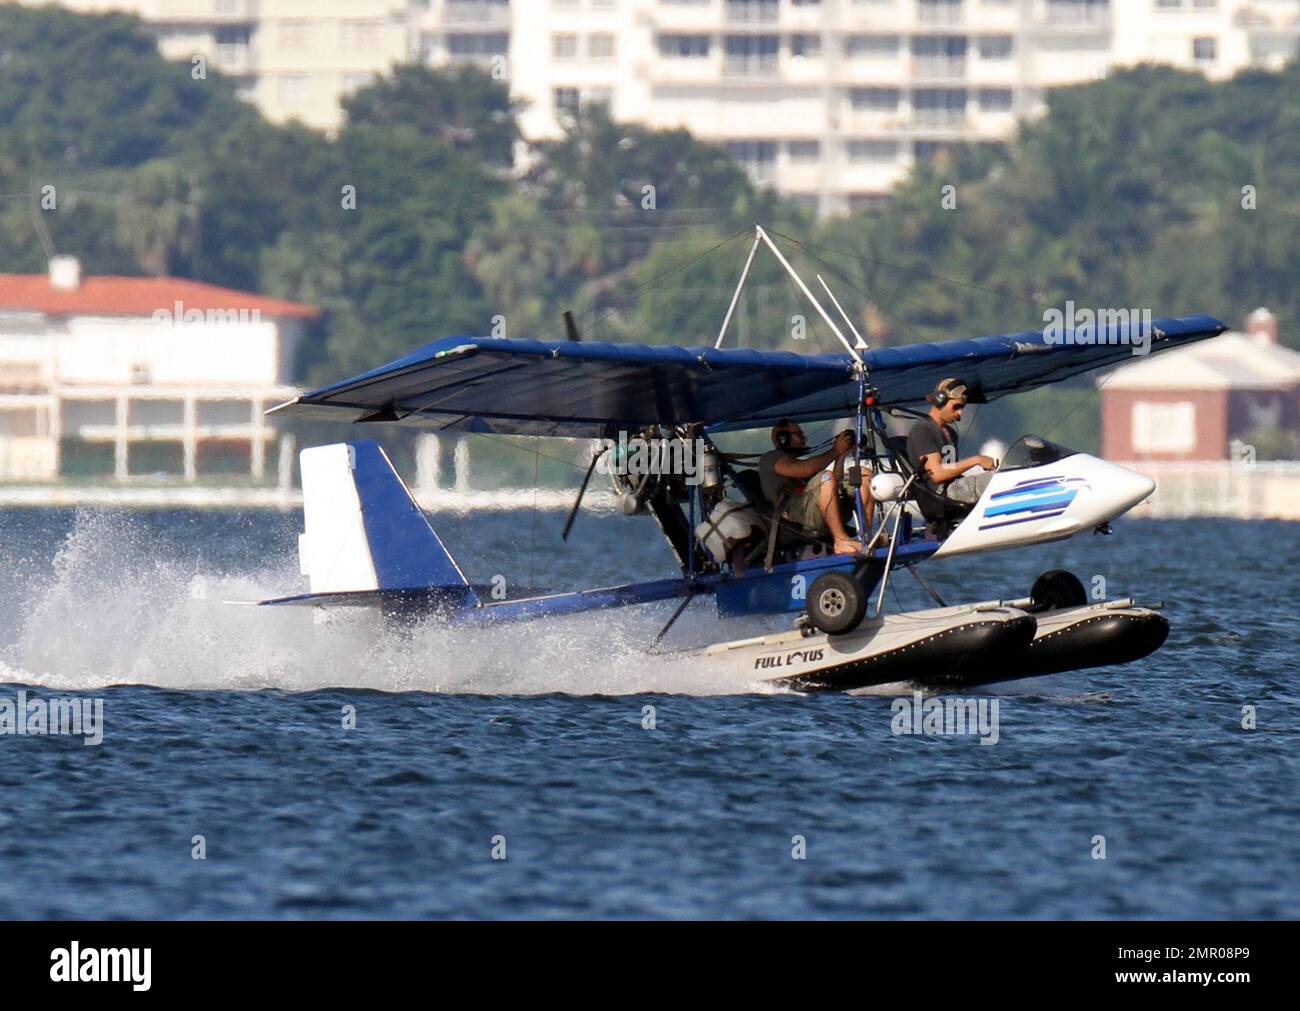 EXCLUSIVE!! Pop music superstar Enrique Iglesias takes to the waves and the  skies with a video crew to film his action-packed lifestyle in Miami.  Iglesias took to the sea in his boat